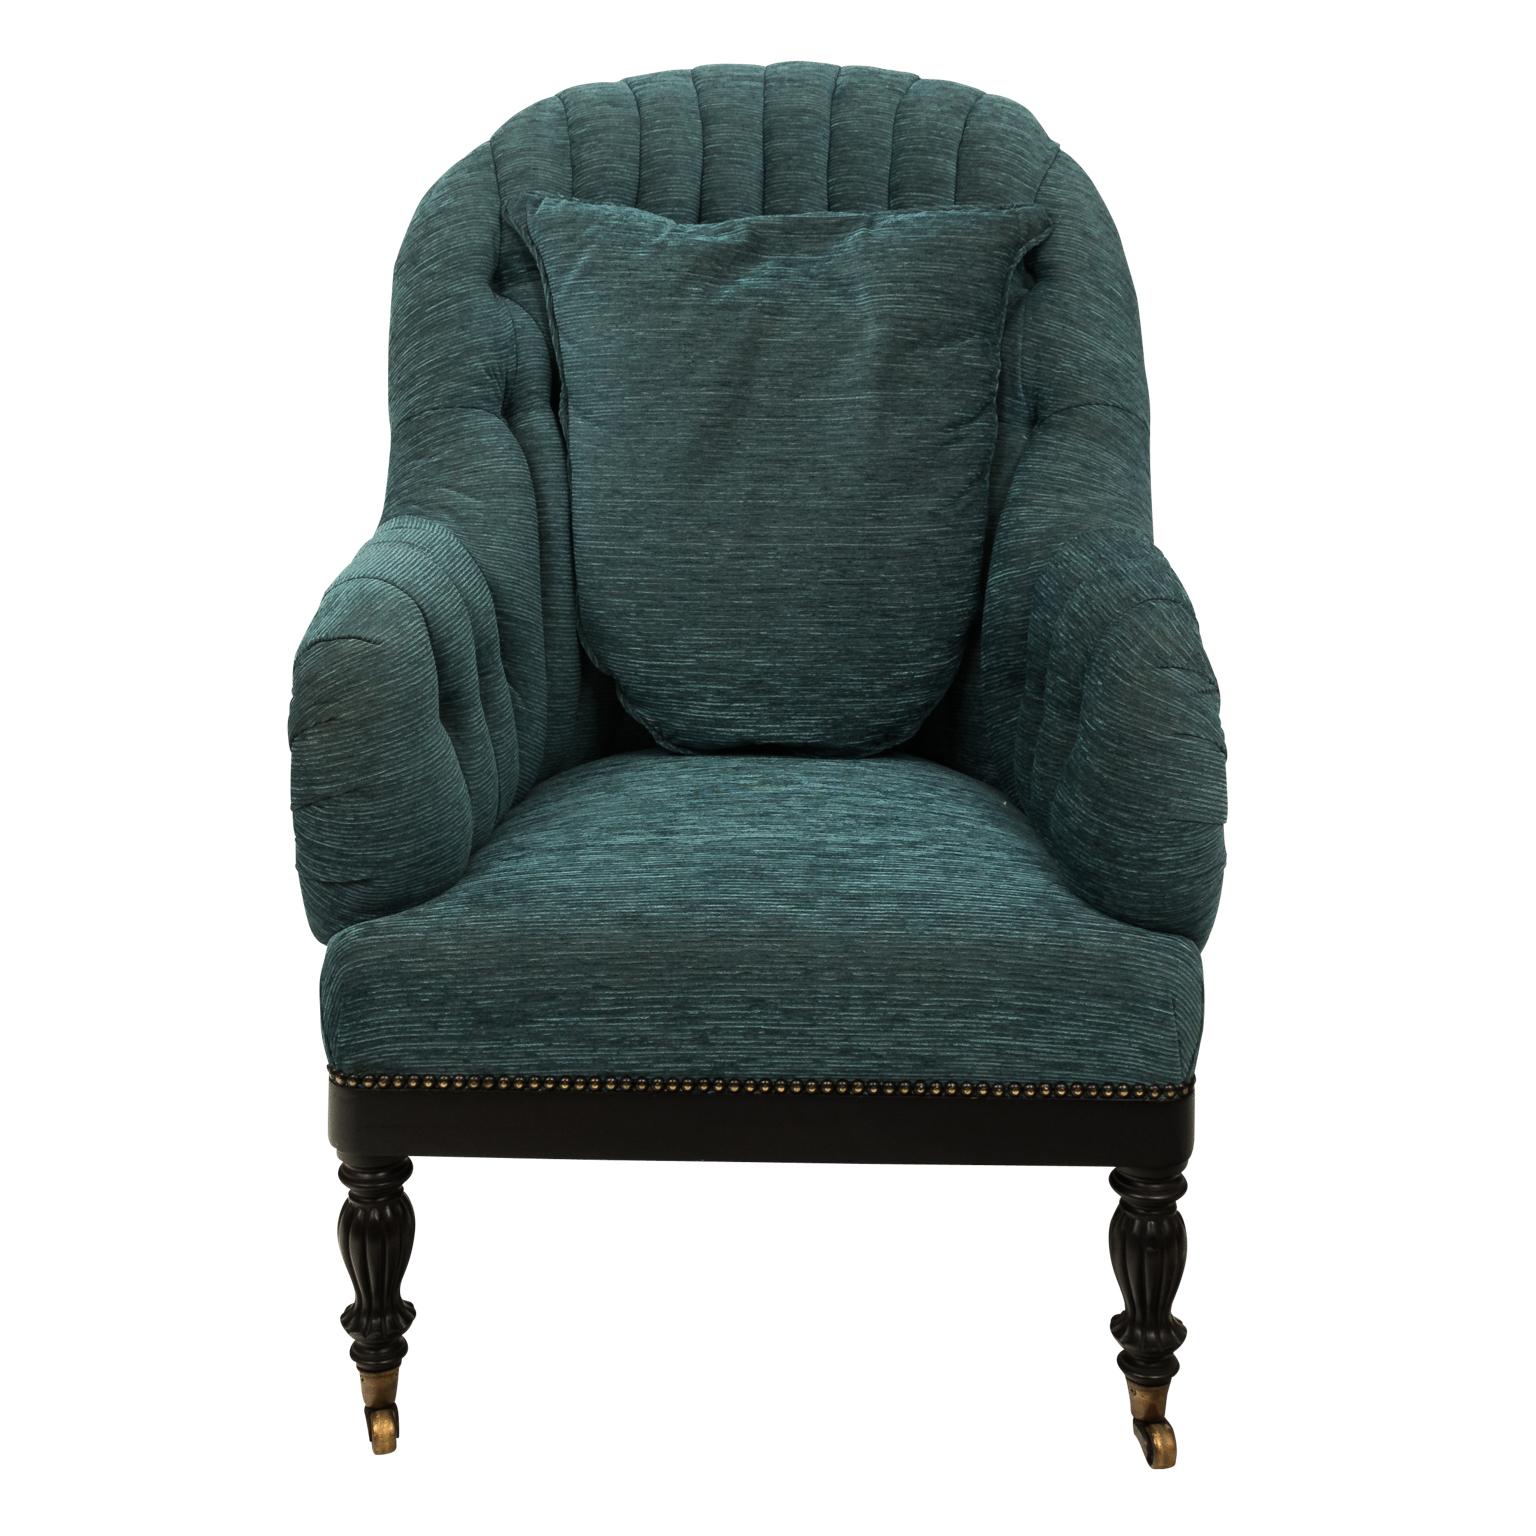 Early 20th Century French Slipper Chair